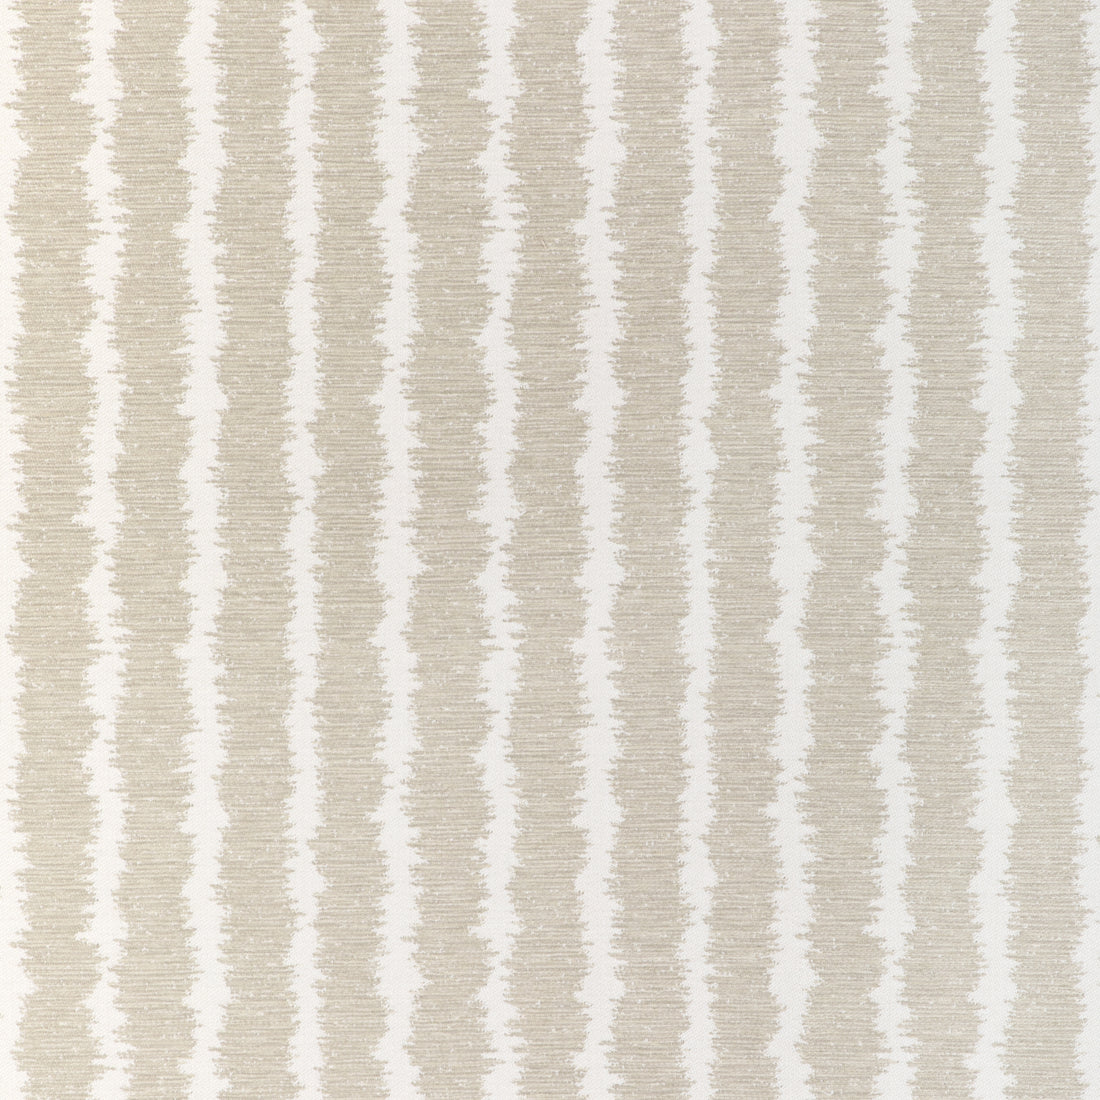 Seaport Stripe fabric in sand color - pattern 36917.16.0 - by Kravet Couture in the Riviera collection